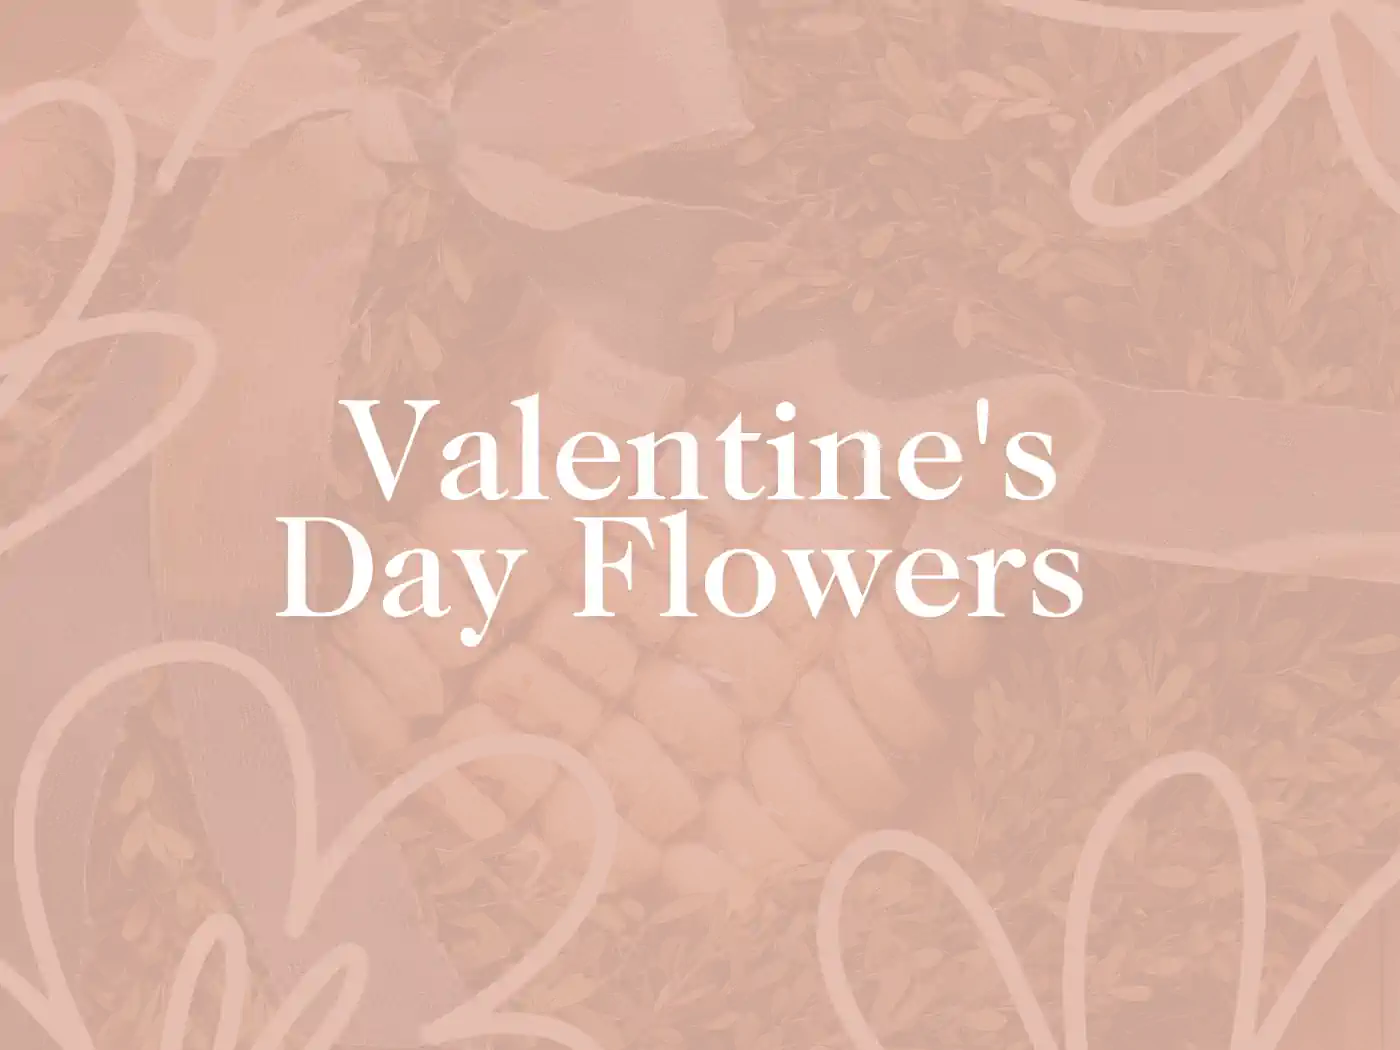 A creative Valentines Day promotional graphic with subtle floral background and ribbon accents, featuring the text "Valentine's Day Flowers" in elegant typography for your loved one. Fabulous Flowers and Gifts delivered with heart. Valentine's Day Flowers.